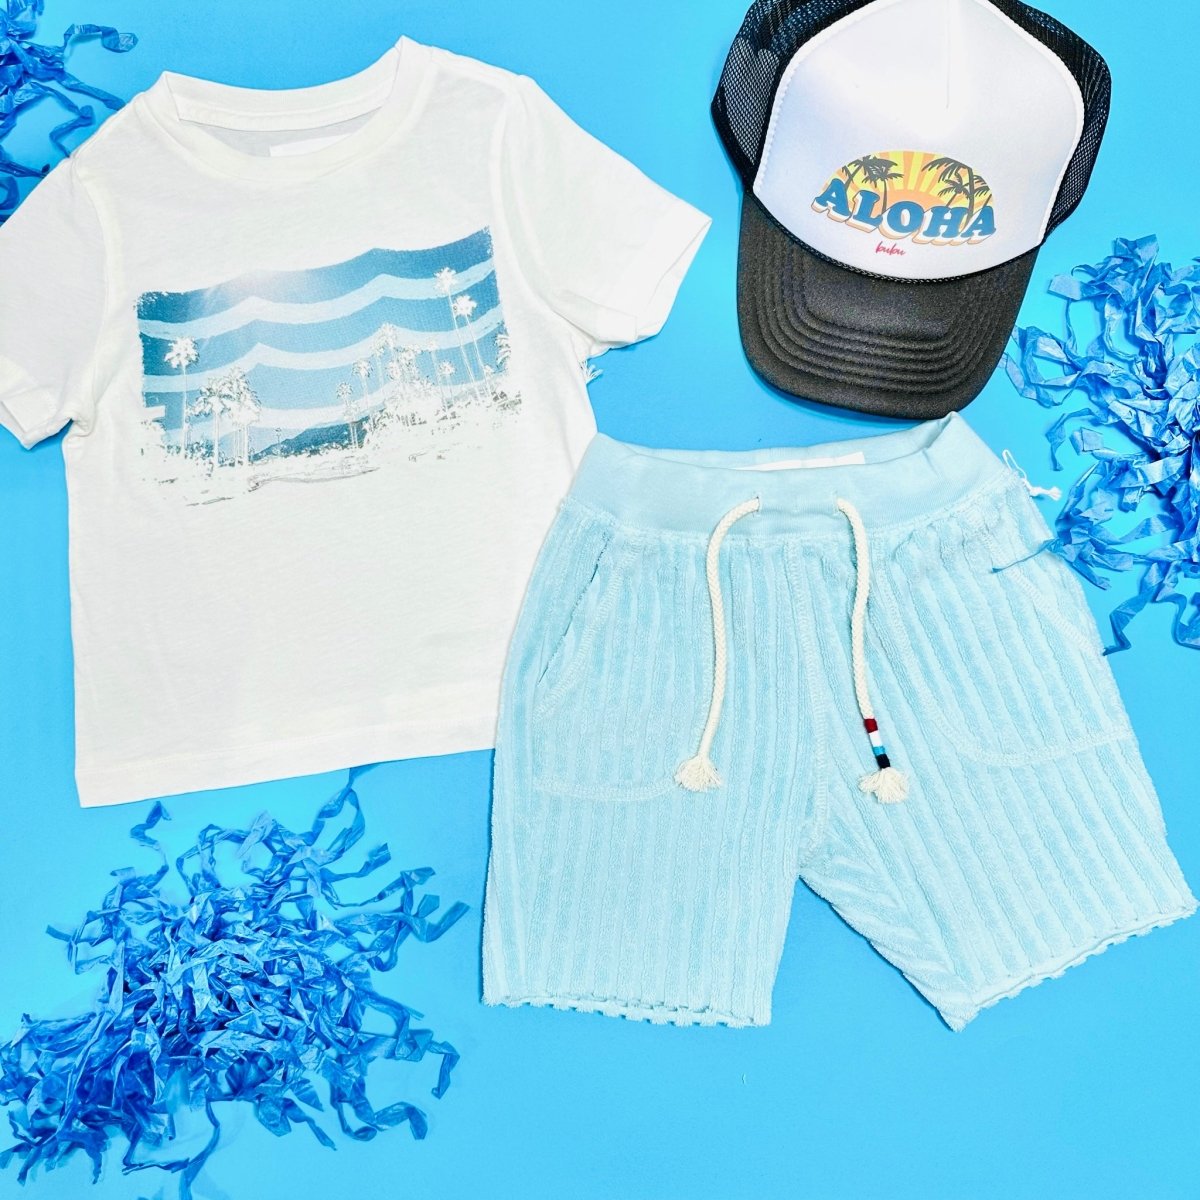 RIVIERA TERRY SHORTS - SOL ANGELES KIDS